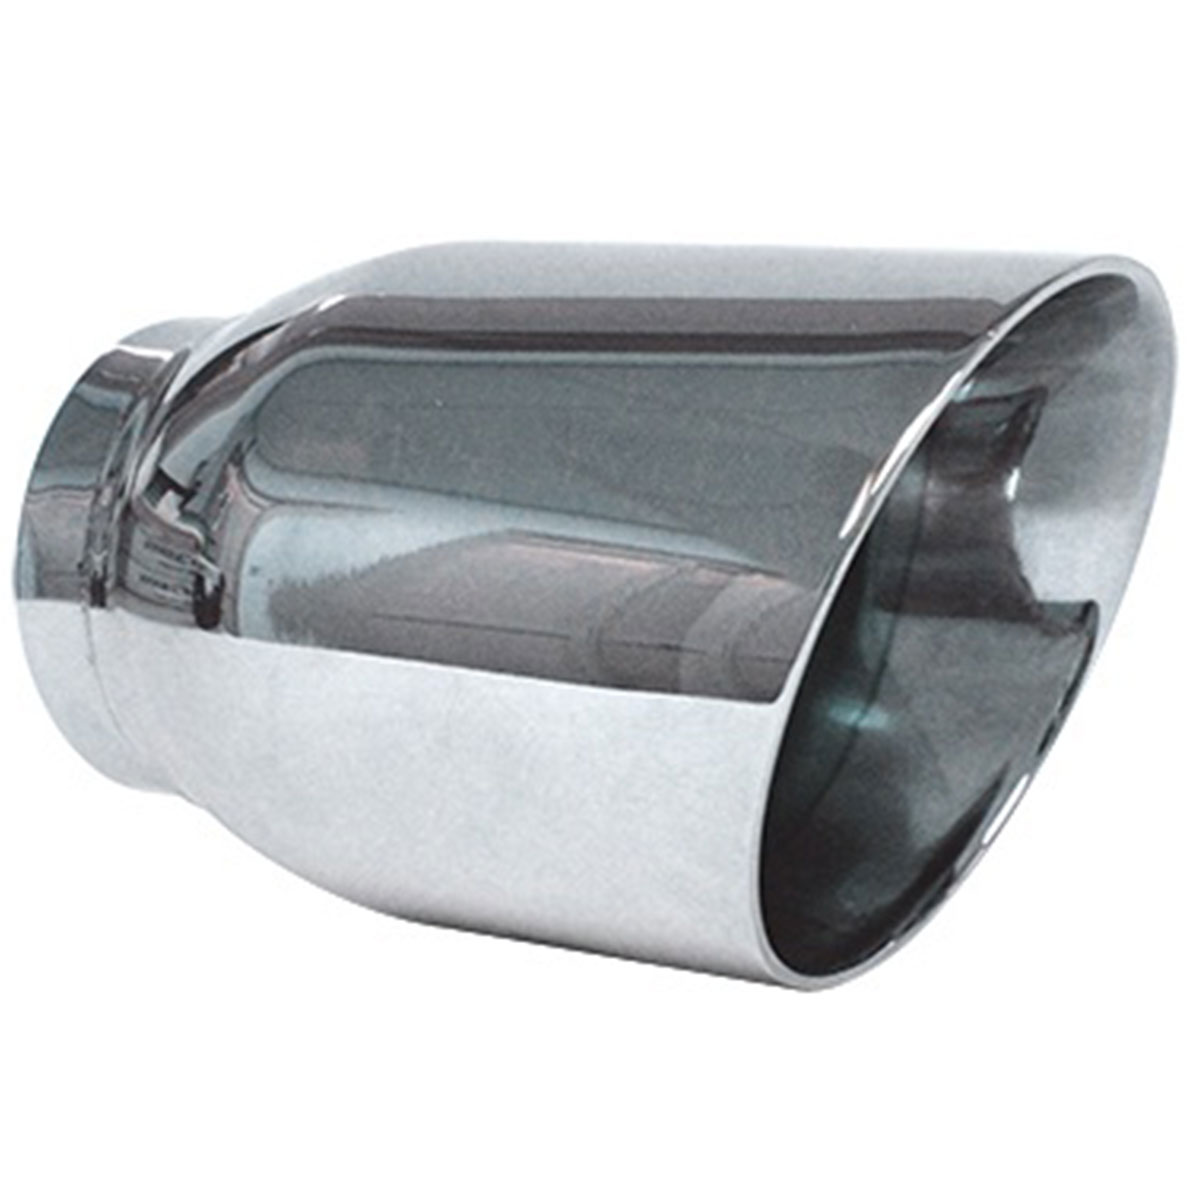 Stainless steel exhaust tip, round double model Hs